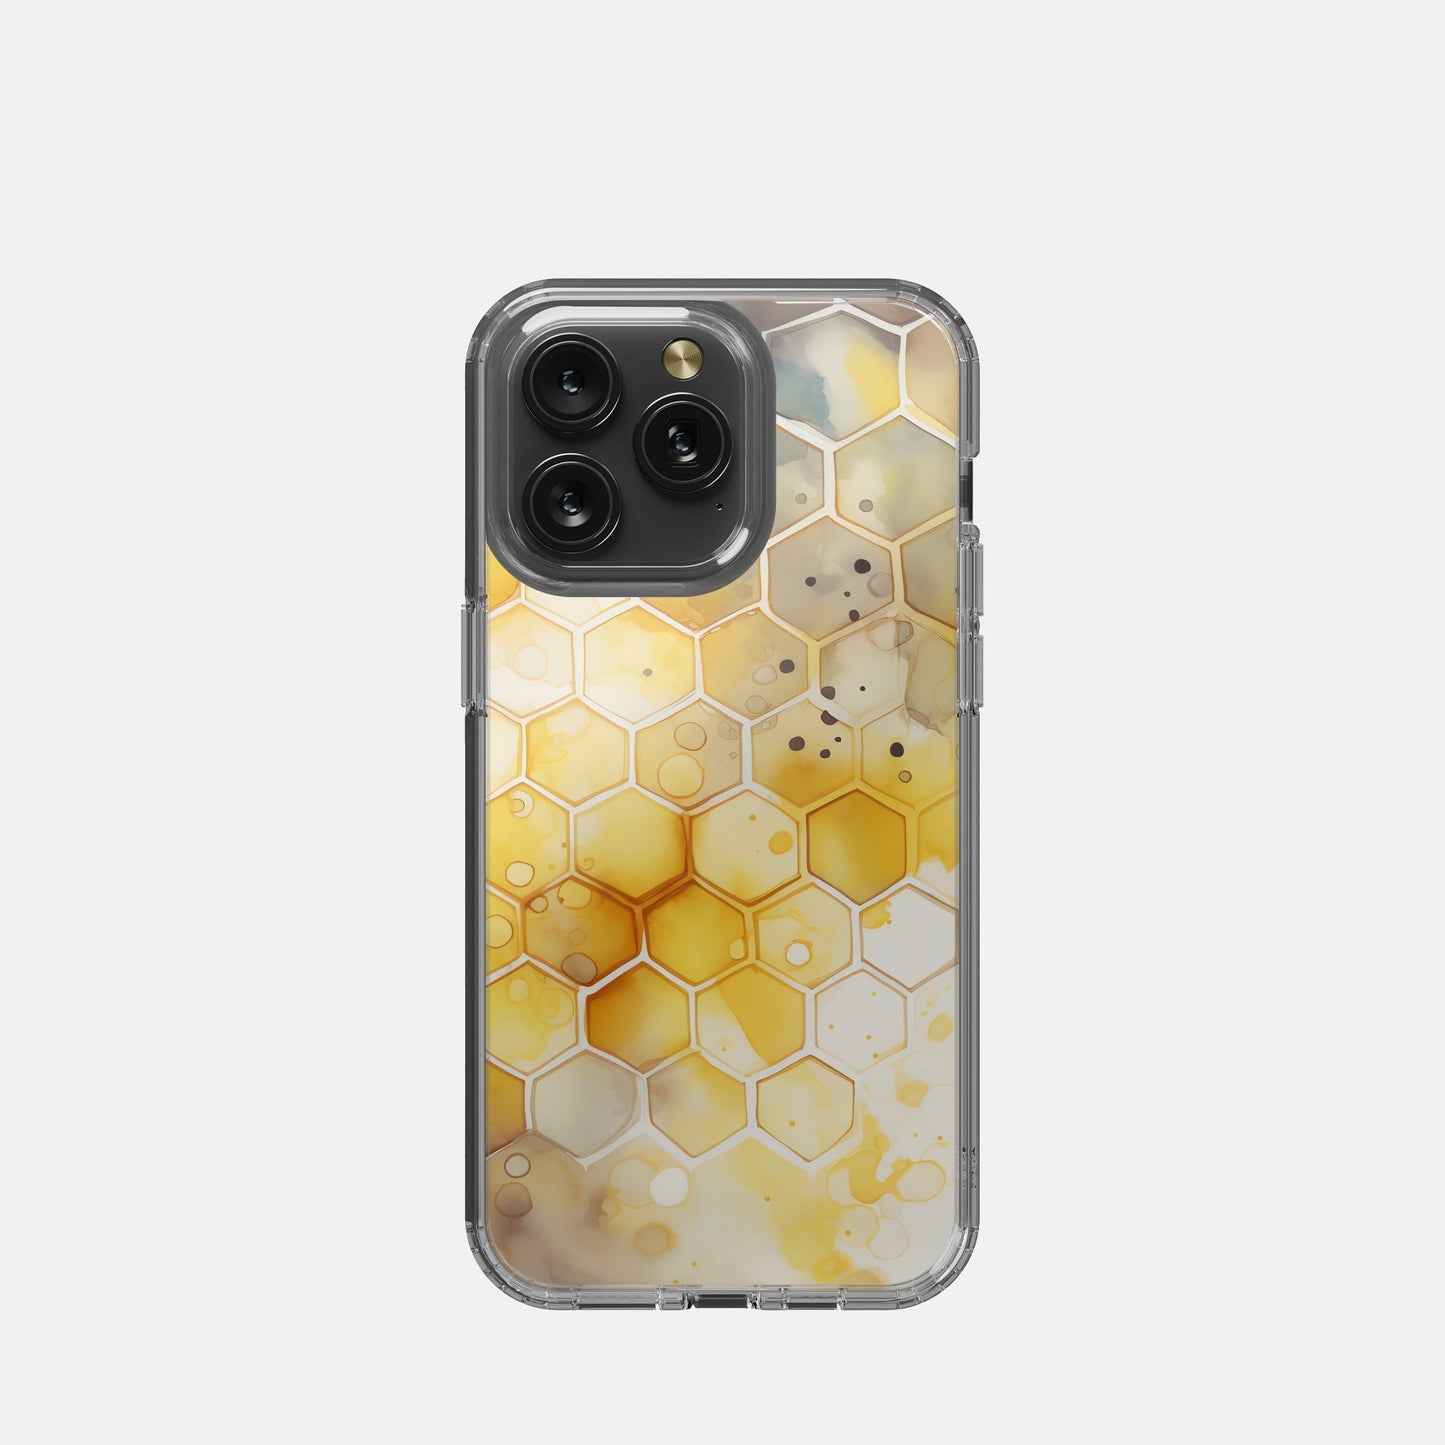 iPhone 15 Pro Max Clear Case - Beehive Splash